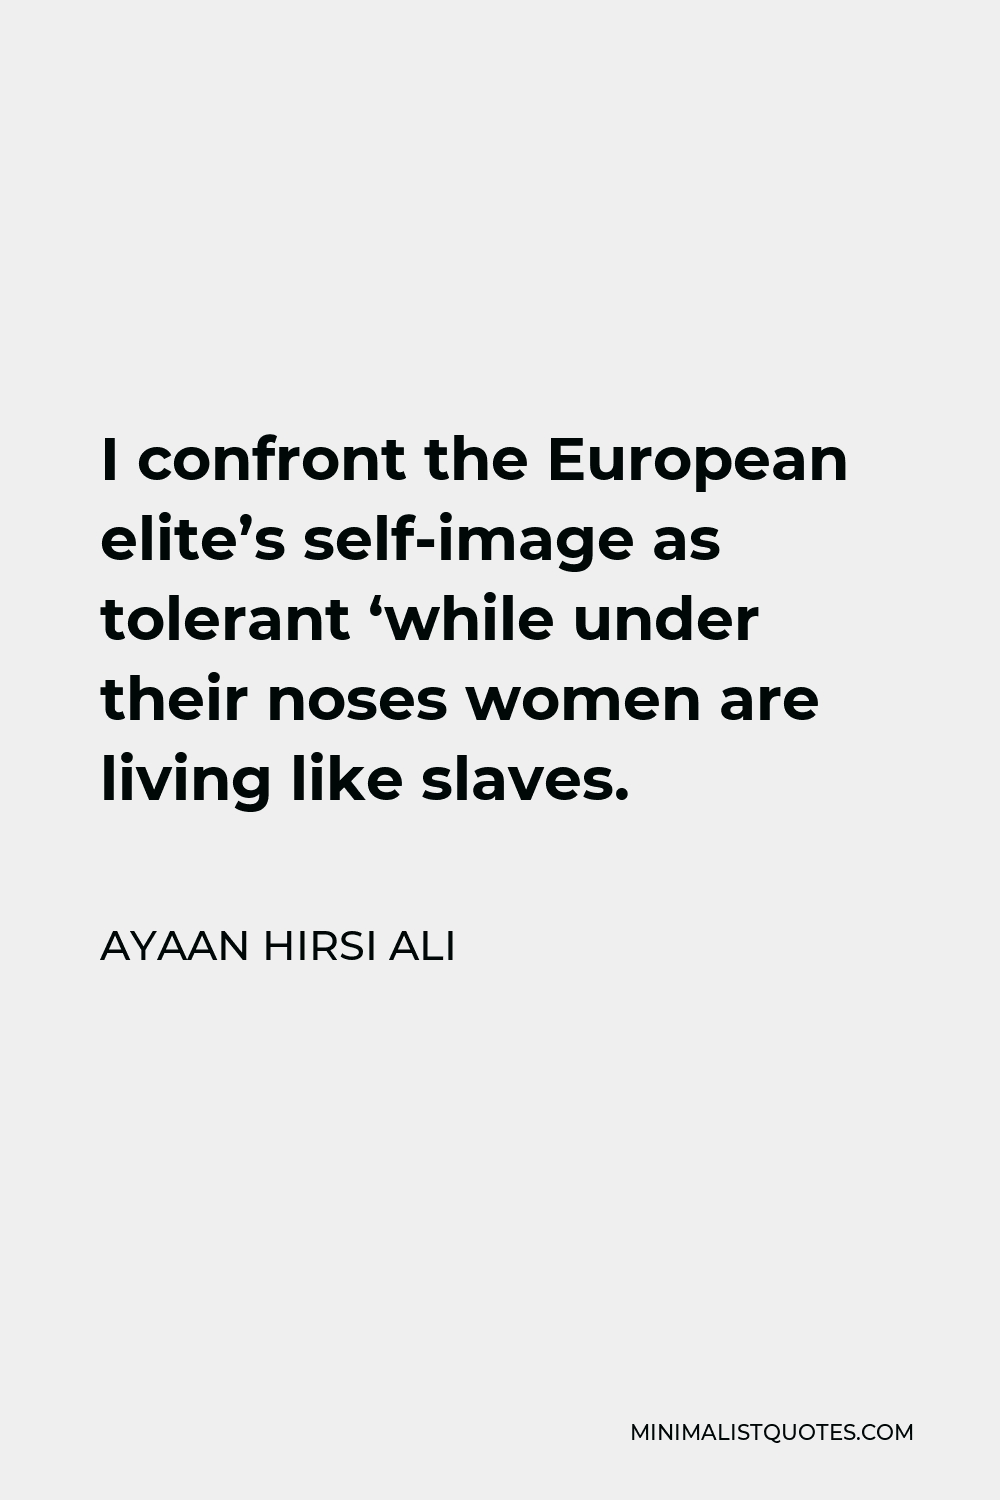 Ayaan Hirsi Ali Quote - I confront the European elite’s self-image as tolerant ‘while under their noses women are living like slaves.